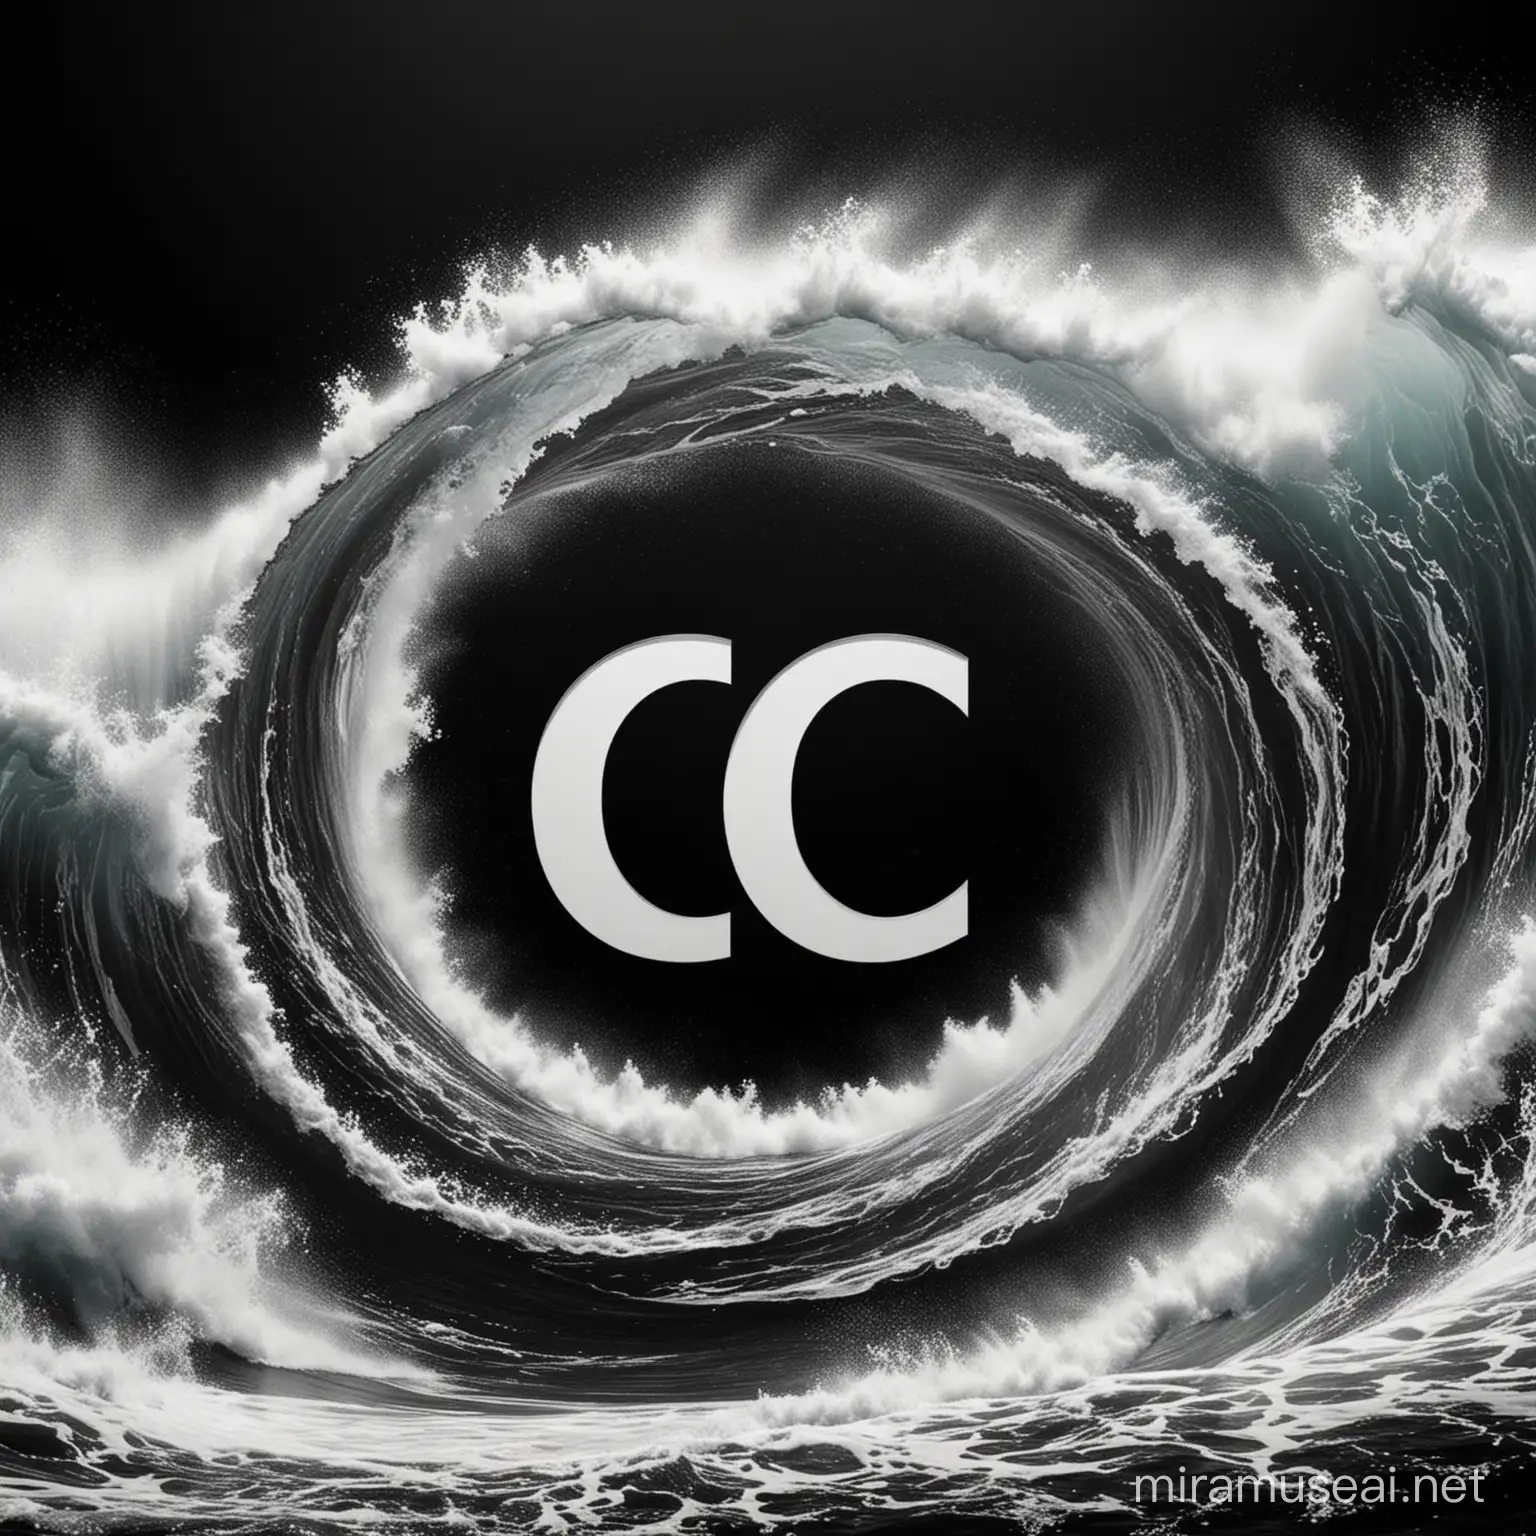 Elegant Black and White Logo with Double C Surrounded by White Waves